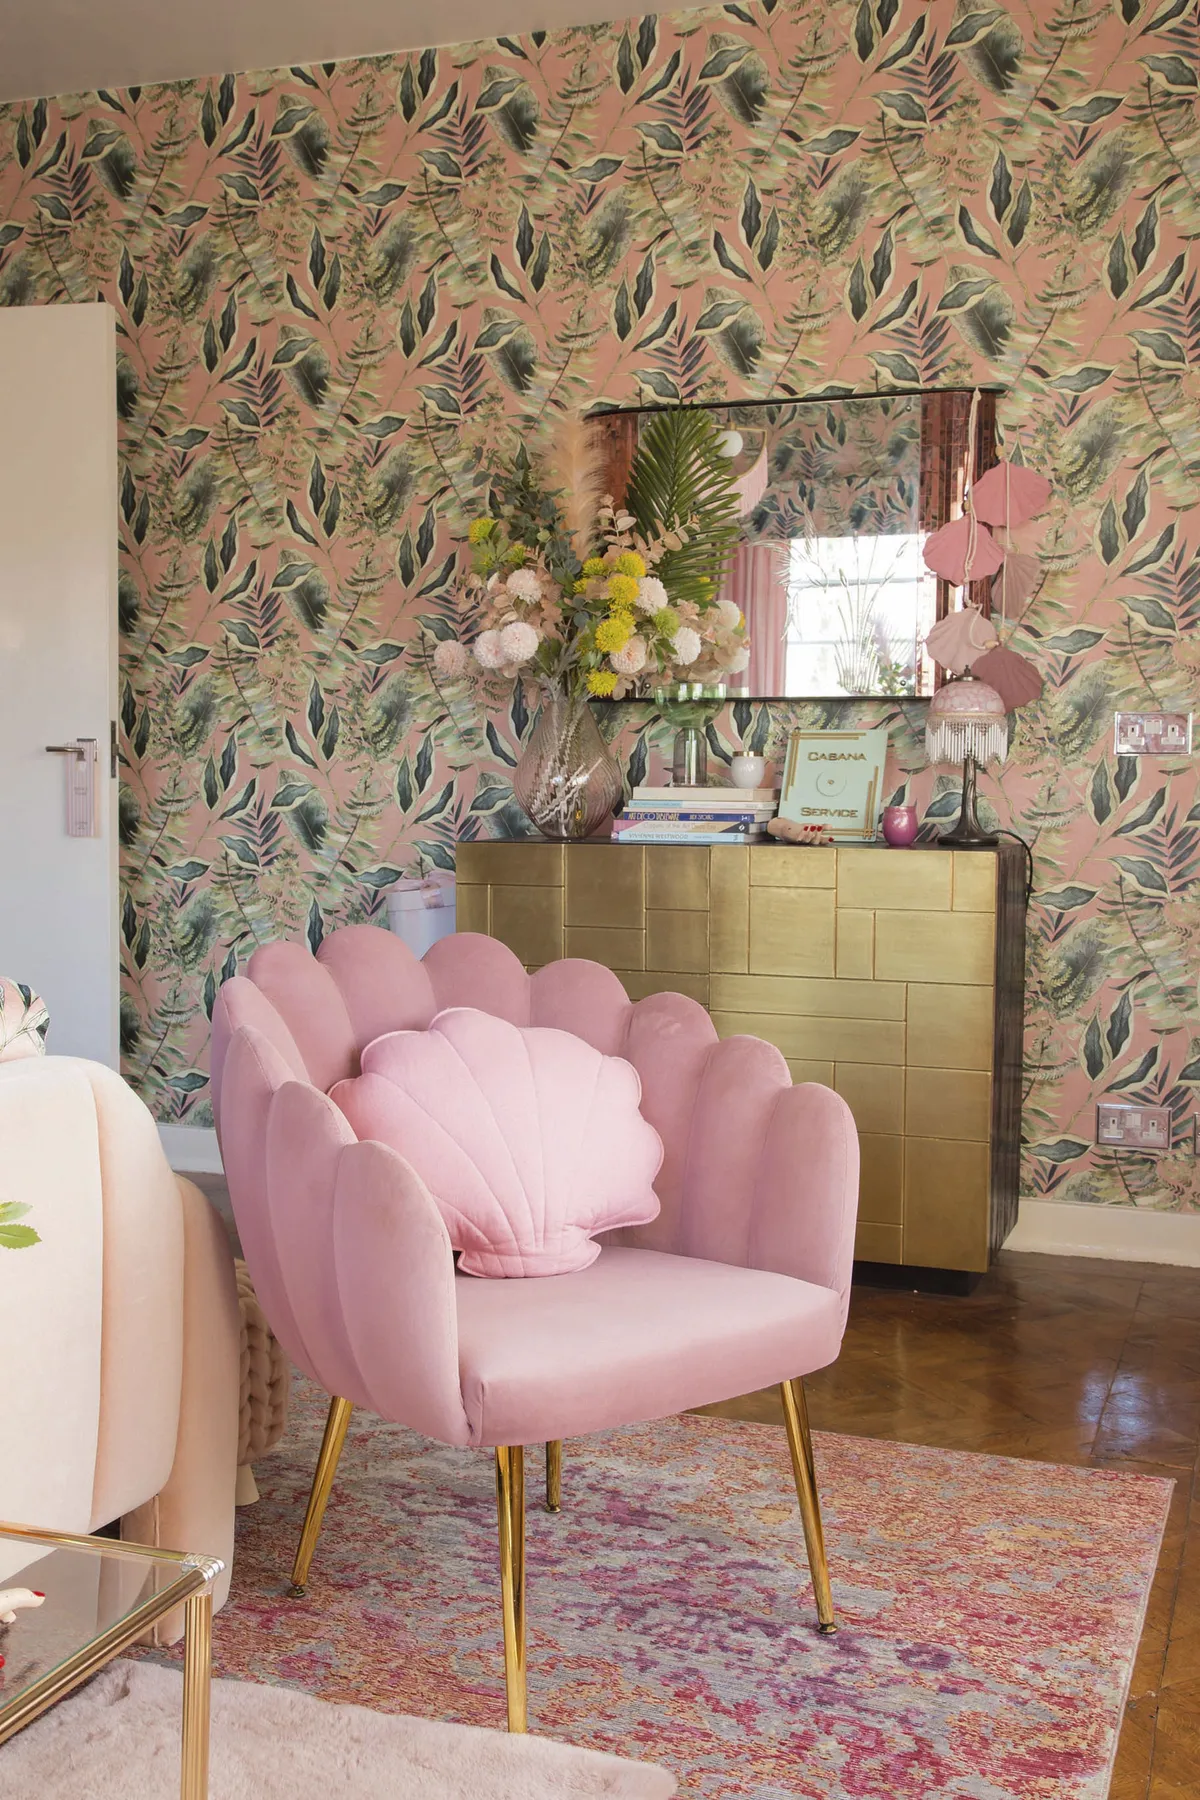 Before its Beverly Hills makeover, the master bedroom, like much of the house, was painted magnolia and had short curtains; Siobhan’s pet hate. She decked it out in pink and botanical prints, and replaced the curtains with extra-long velvet numbers from IKEA